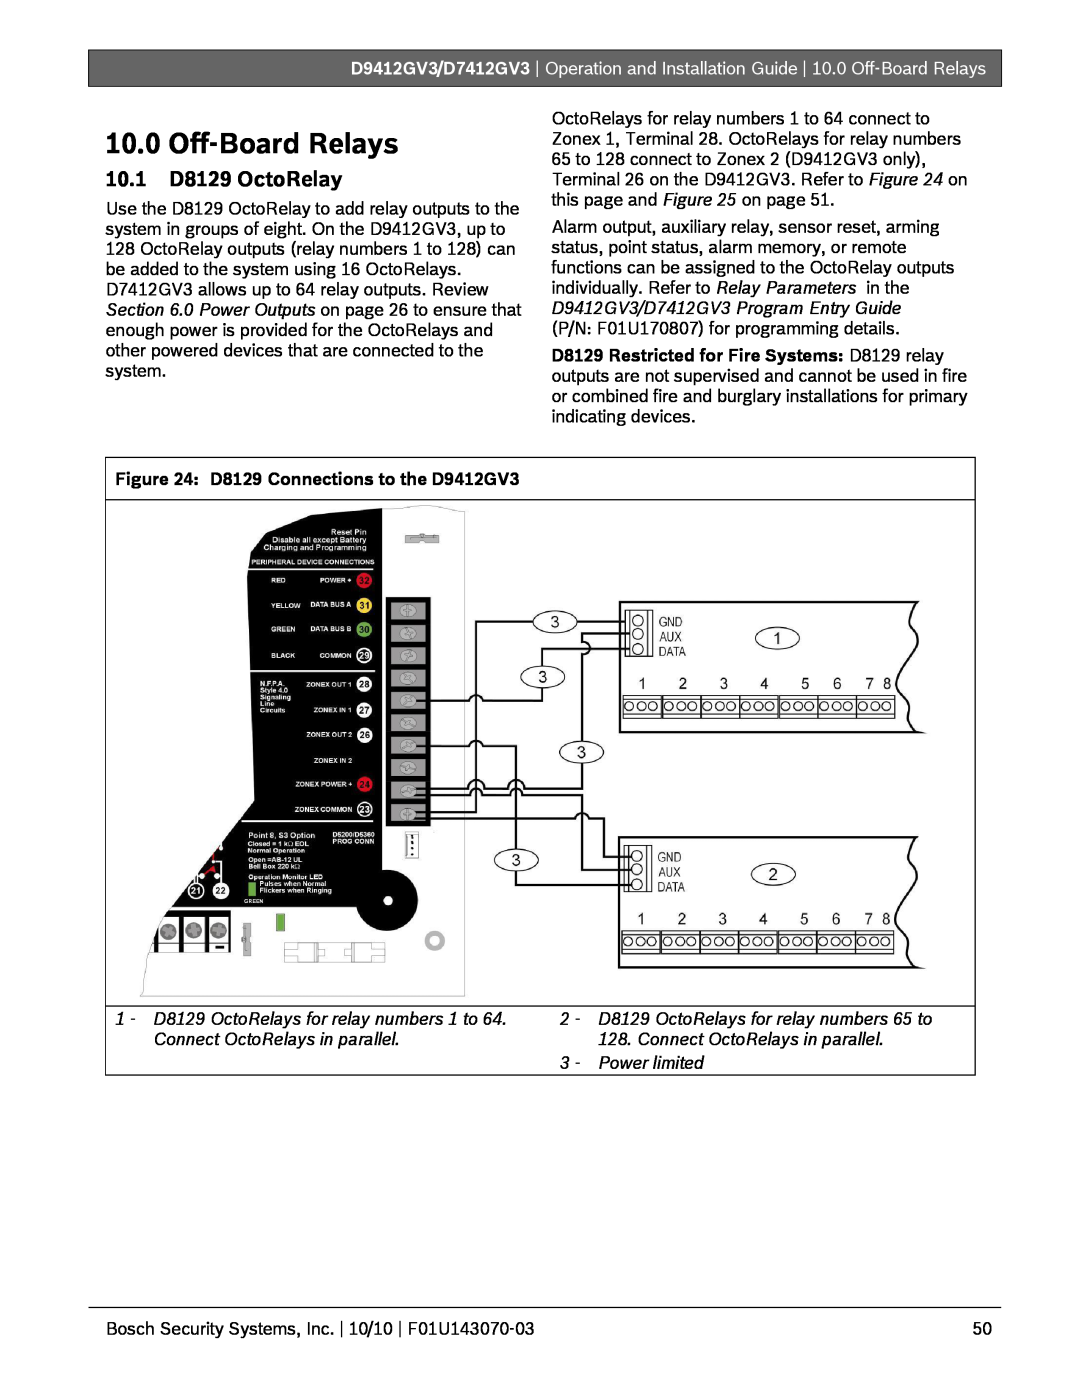 Bosch Appliances D7412GV3 manual 10.0Off-BoardRelays, 10.1D8129 OctoRelay, D8129 Connections to the D9412GV3 